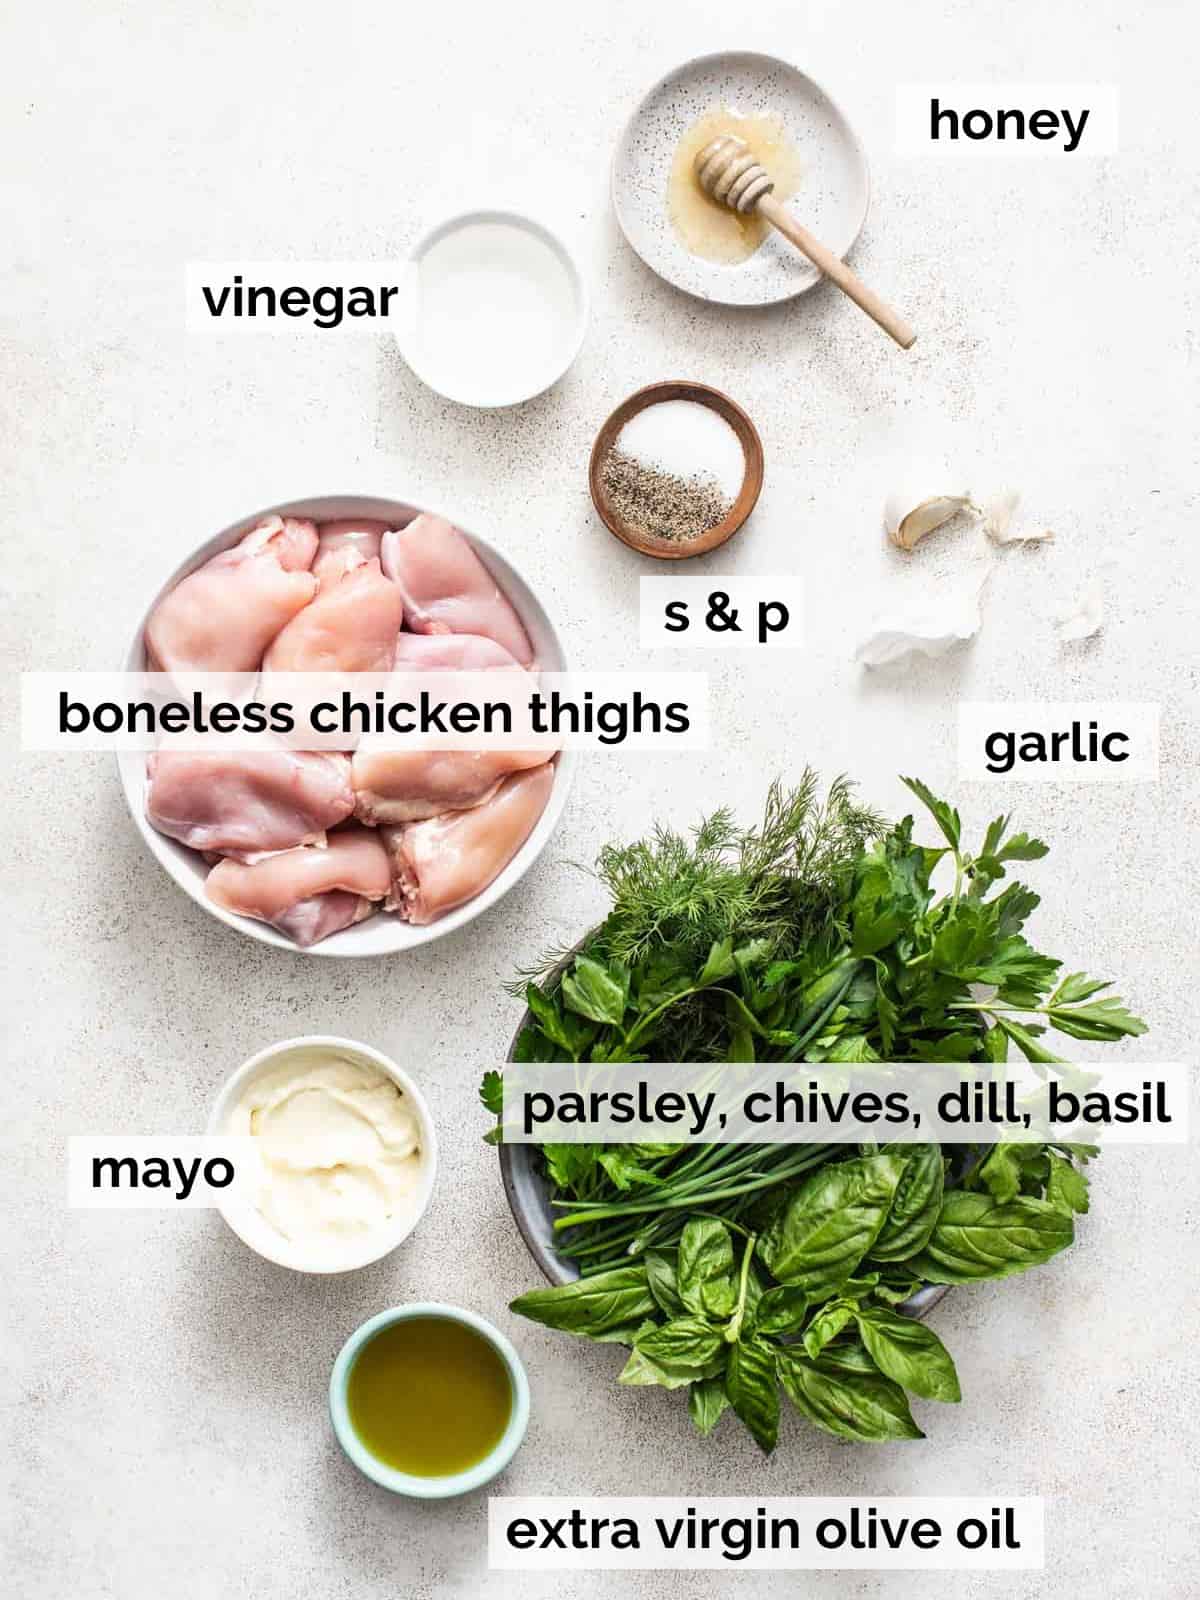 Ingredients for boneless chicken thighs with green goddess sauce.